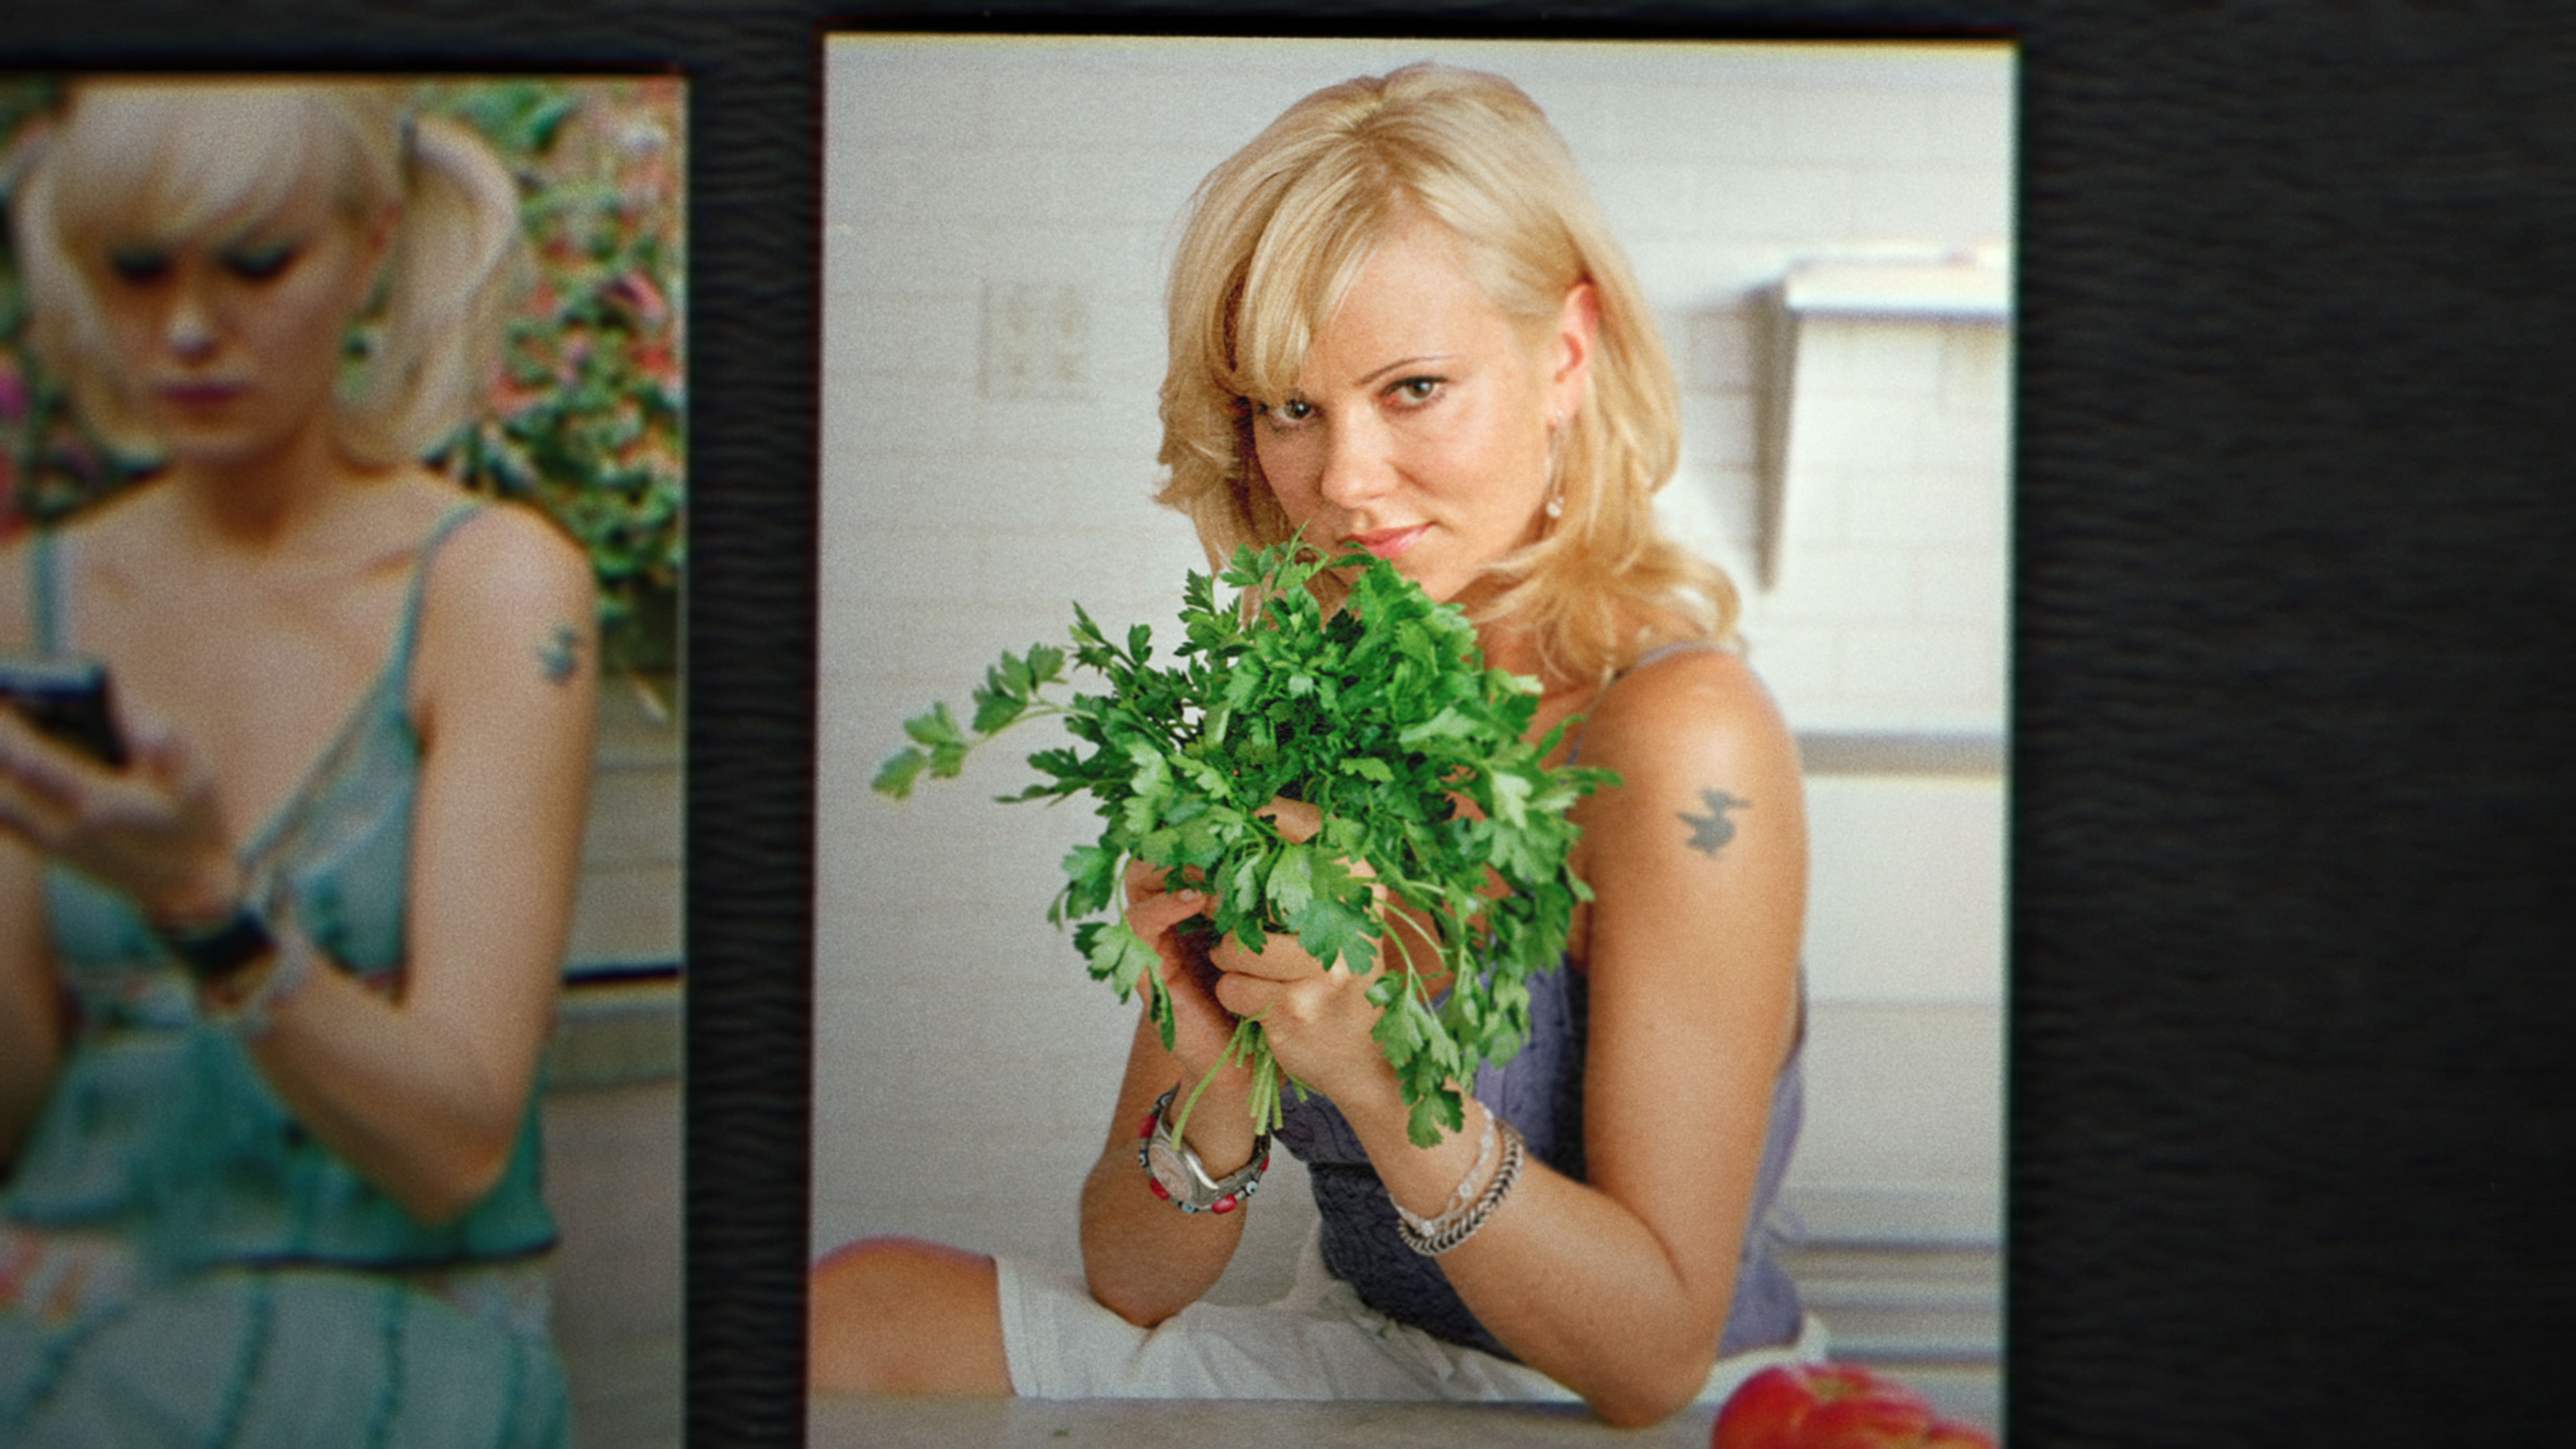 Still from “Bad Vegan” shows photo of woman holding up a bunch of cilantro and posing for the camera.